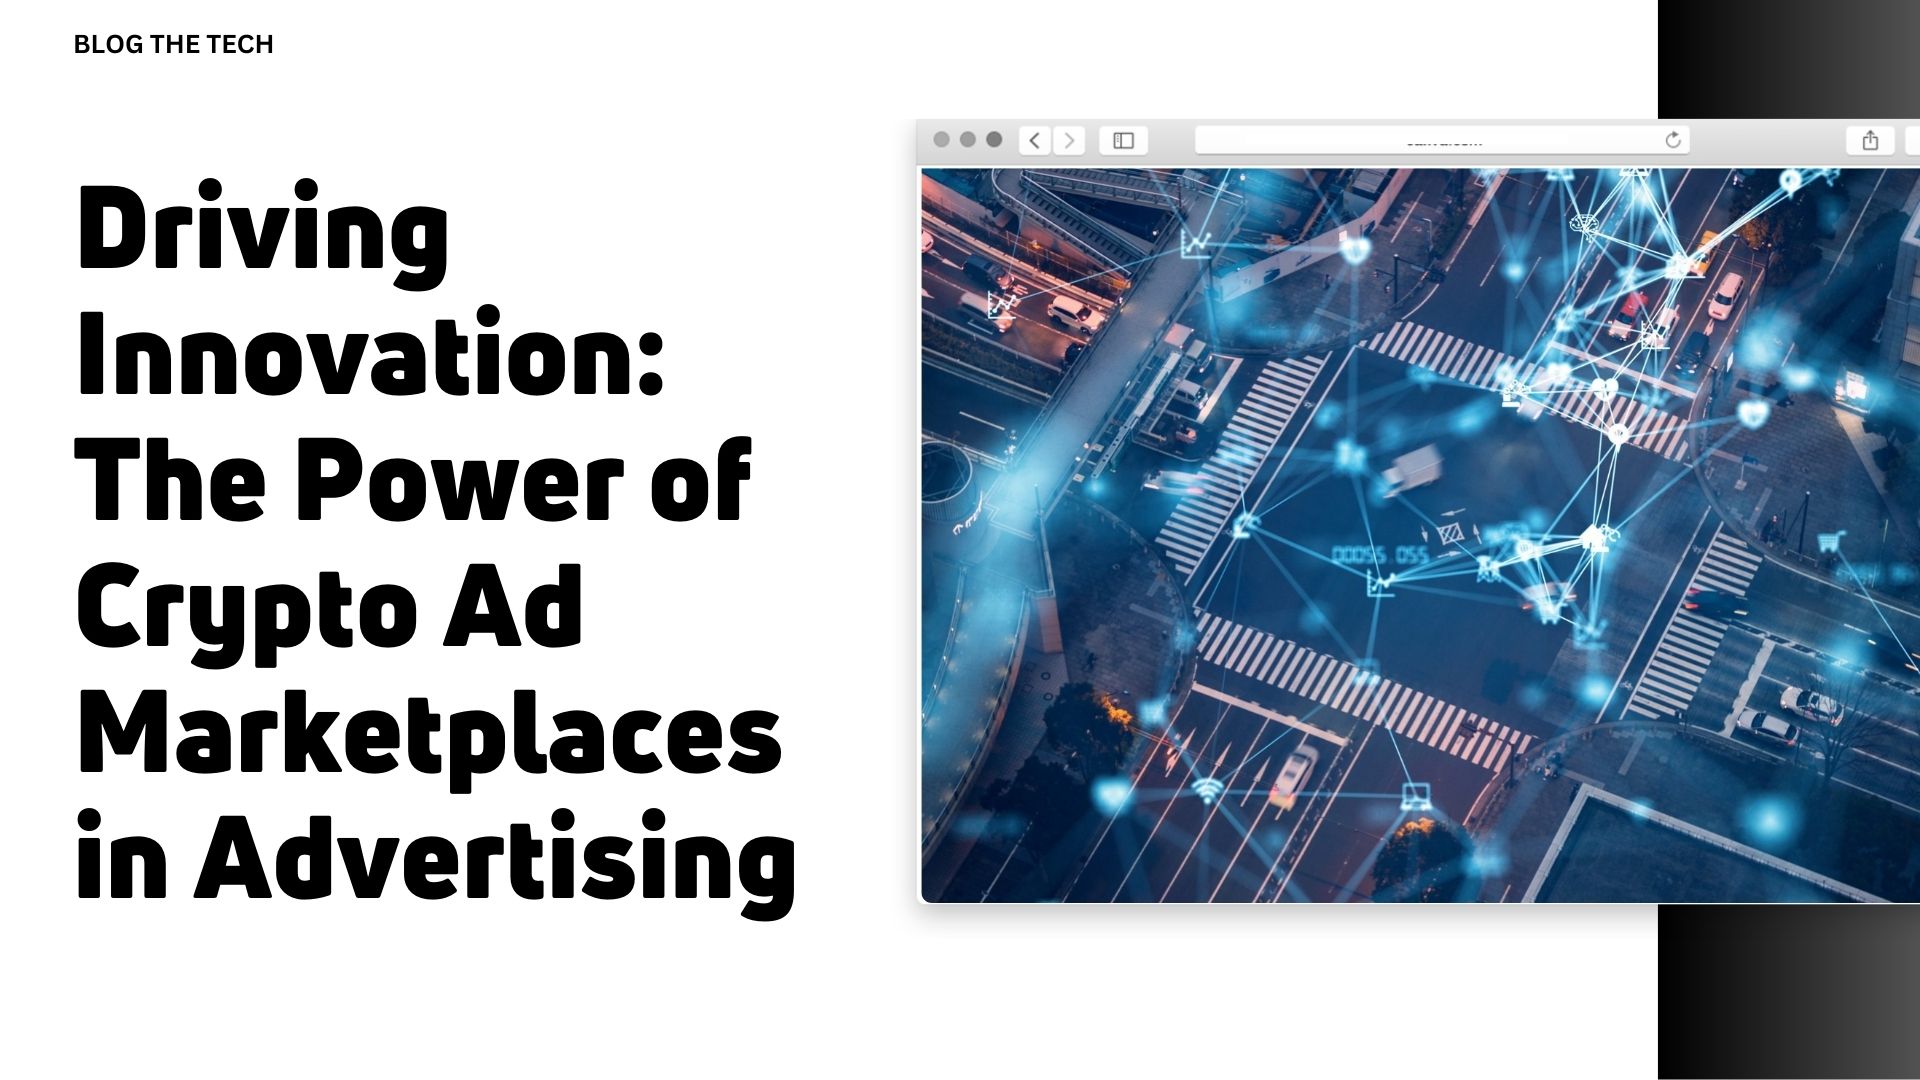 Driving Innovation: The Power of Crypto Ad Marketplaces in Advertising